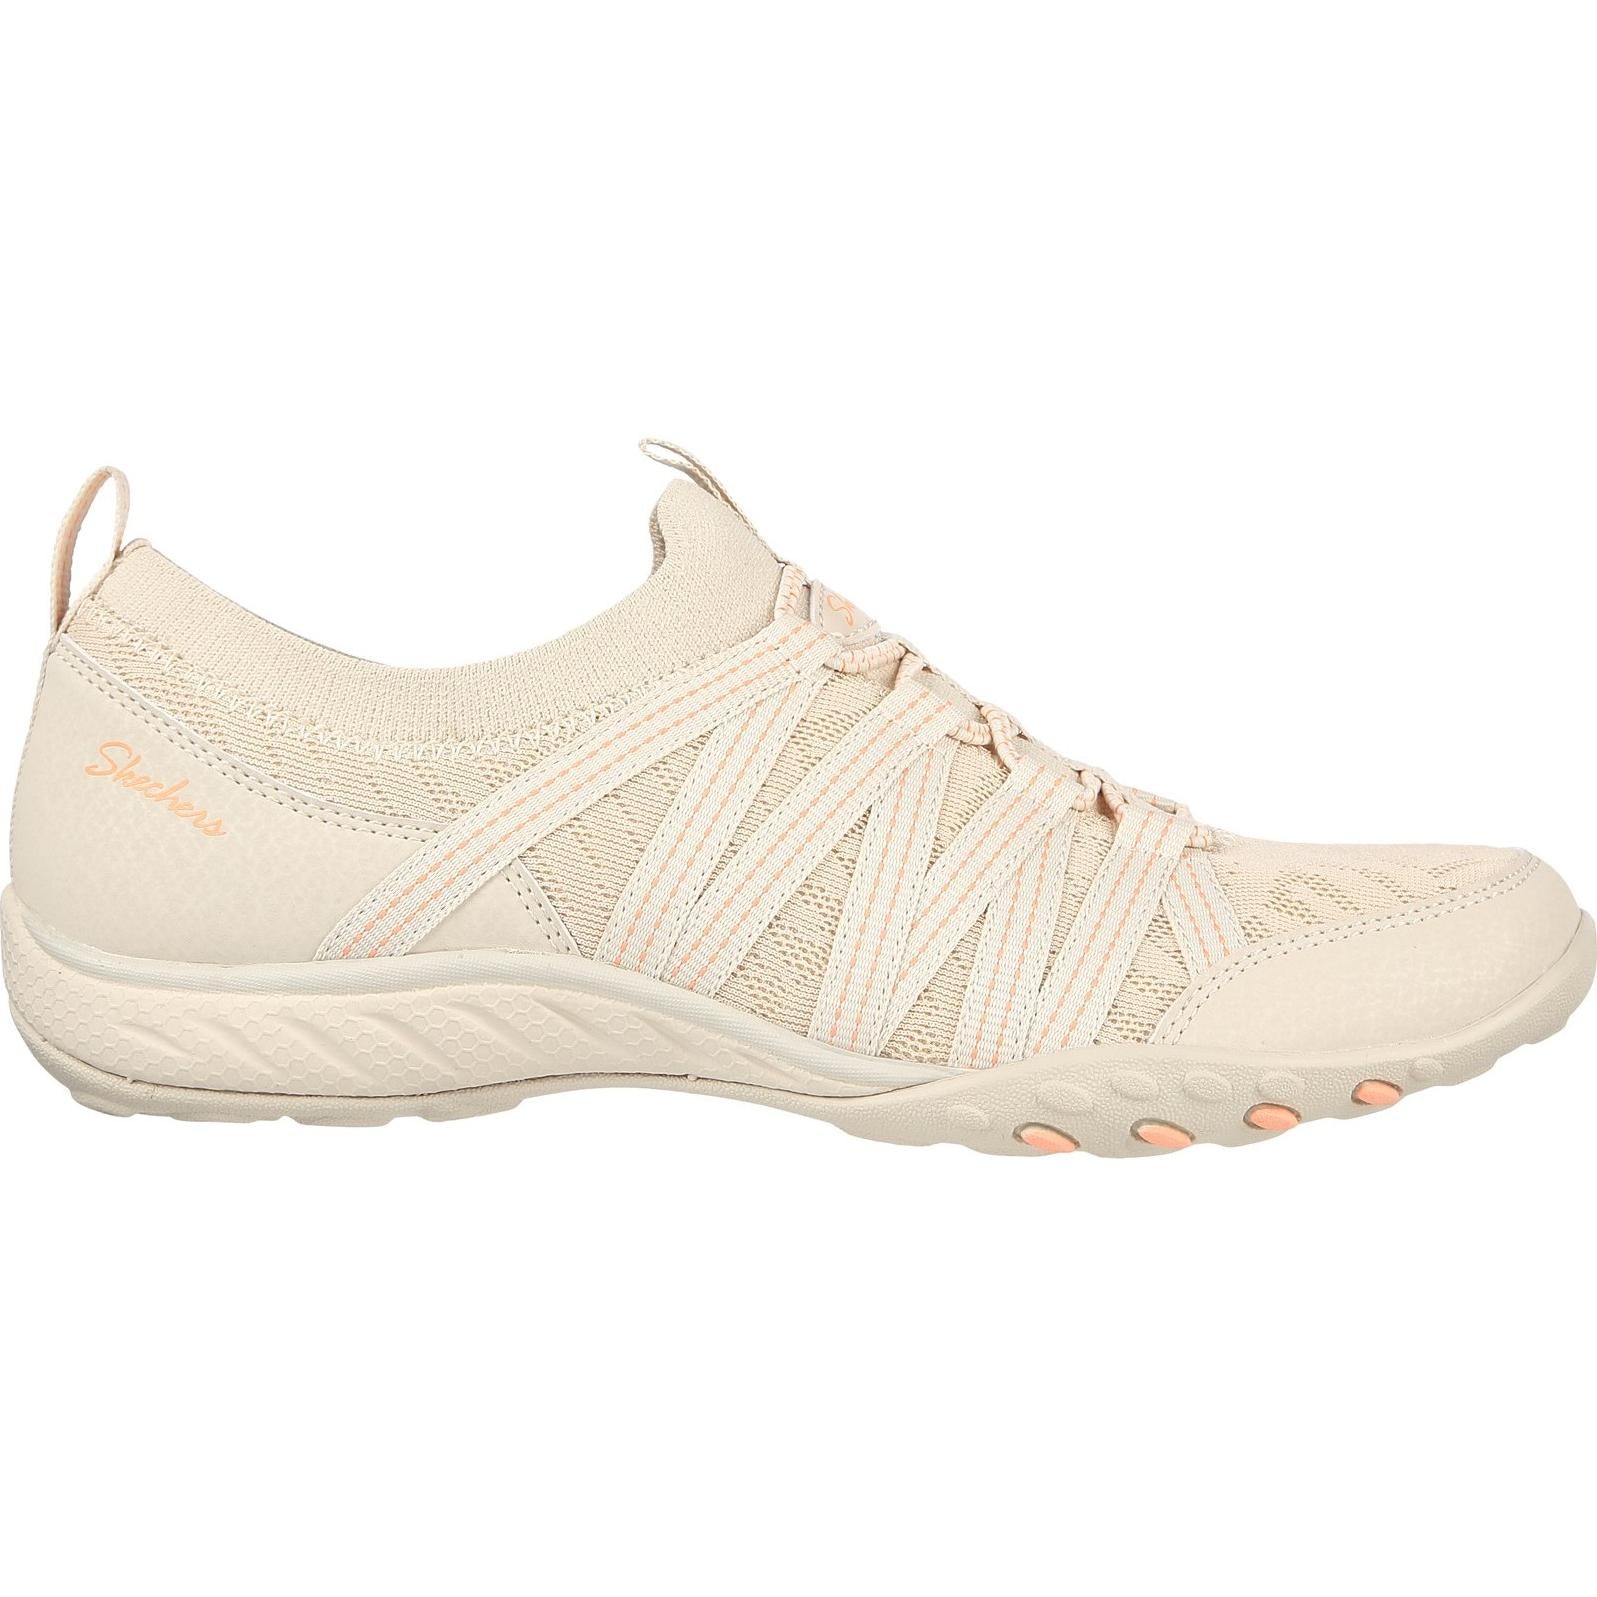 Skechers Breathe-Easy First Light Trainers